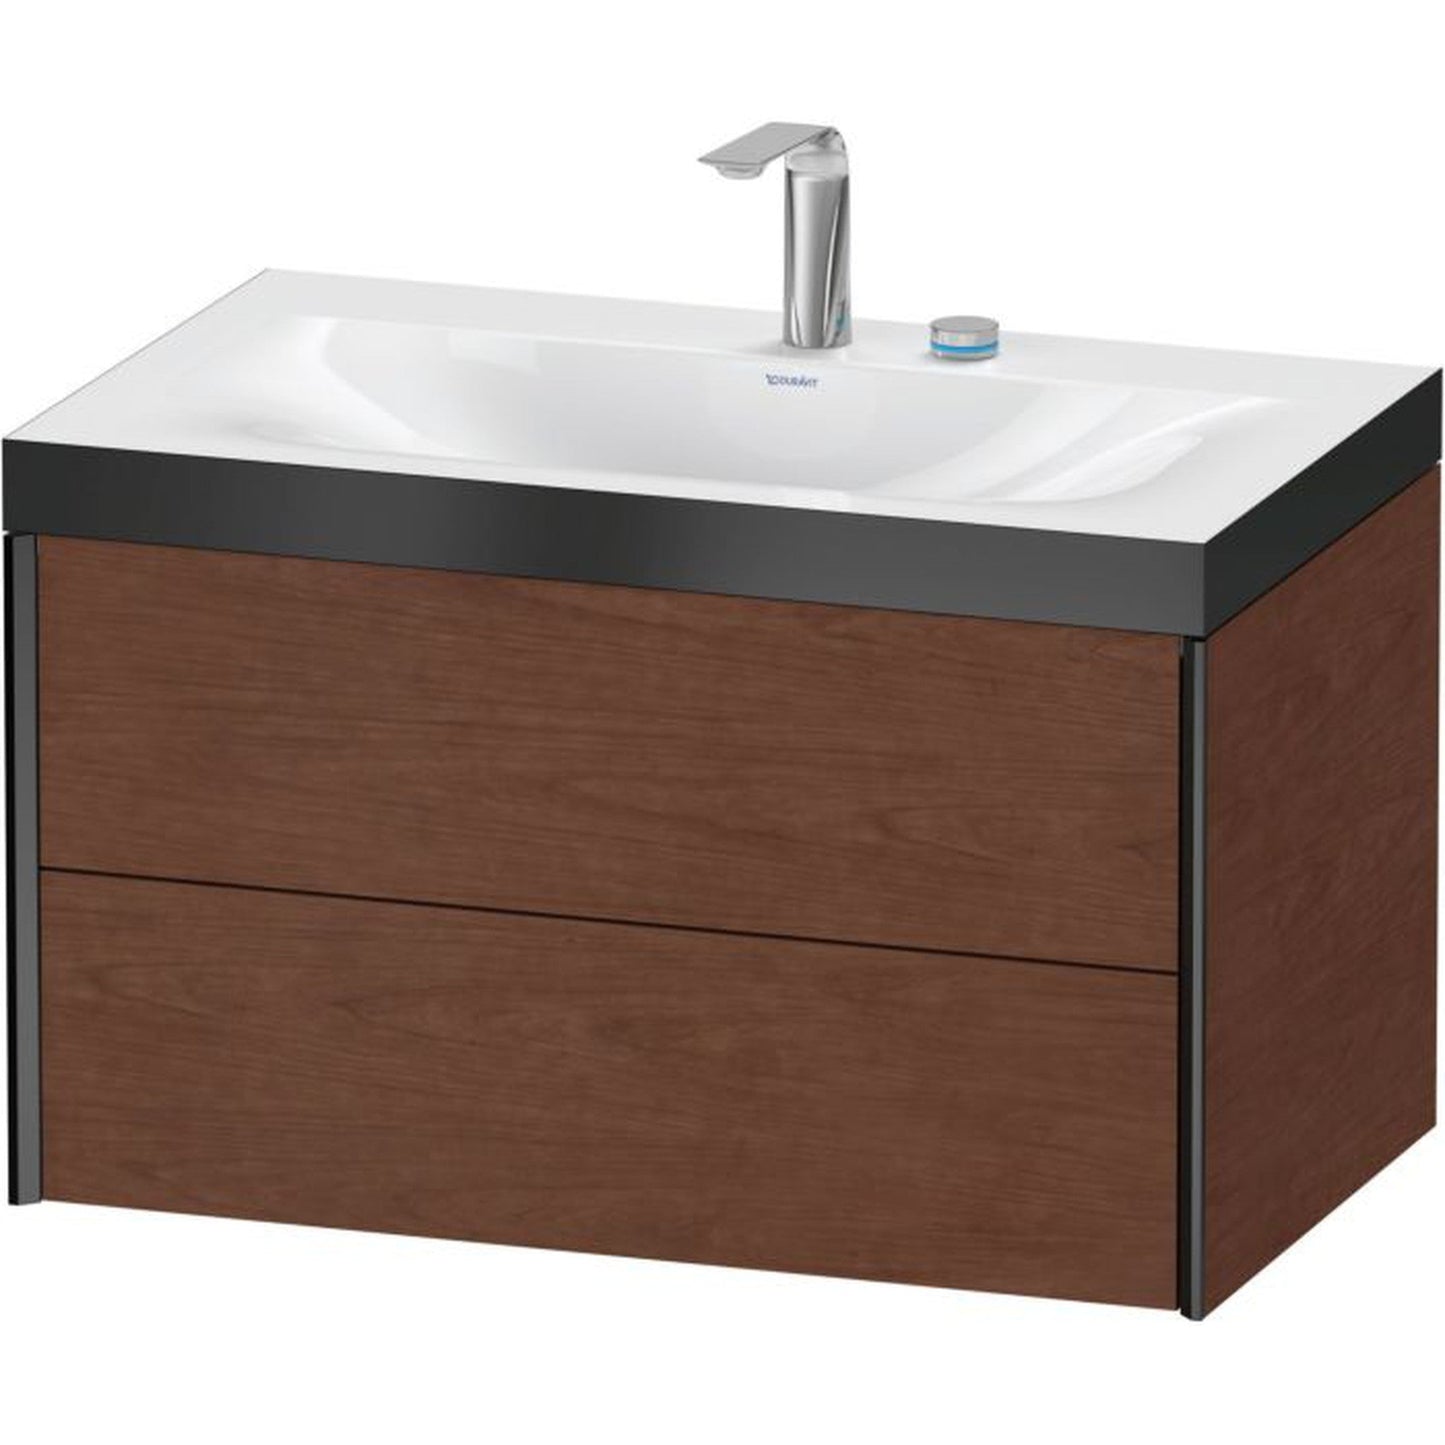 Duravit Xviu 31" x 20" x 19" Two Drawer C-Bonded Wall-Mount Vanity Kit With Two Tap Holes, American Walnut (XV4615EB213P)